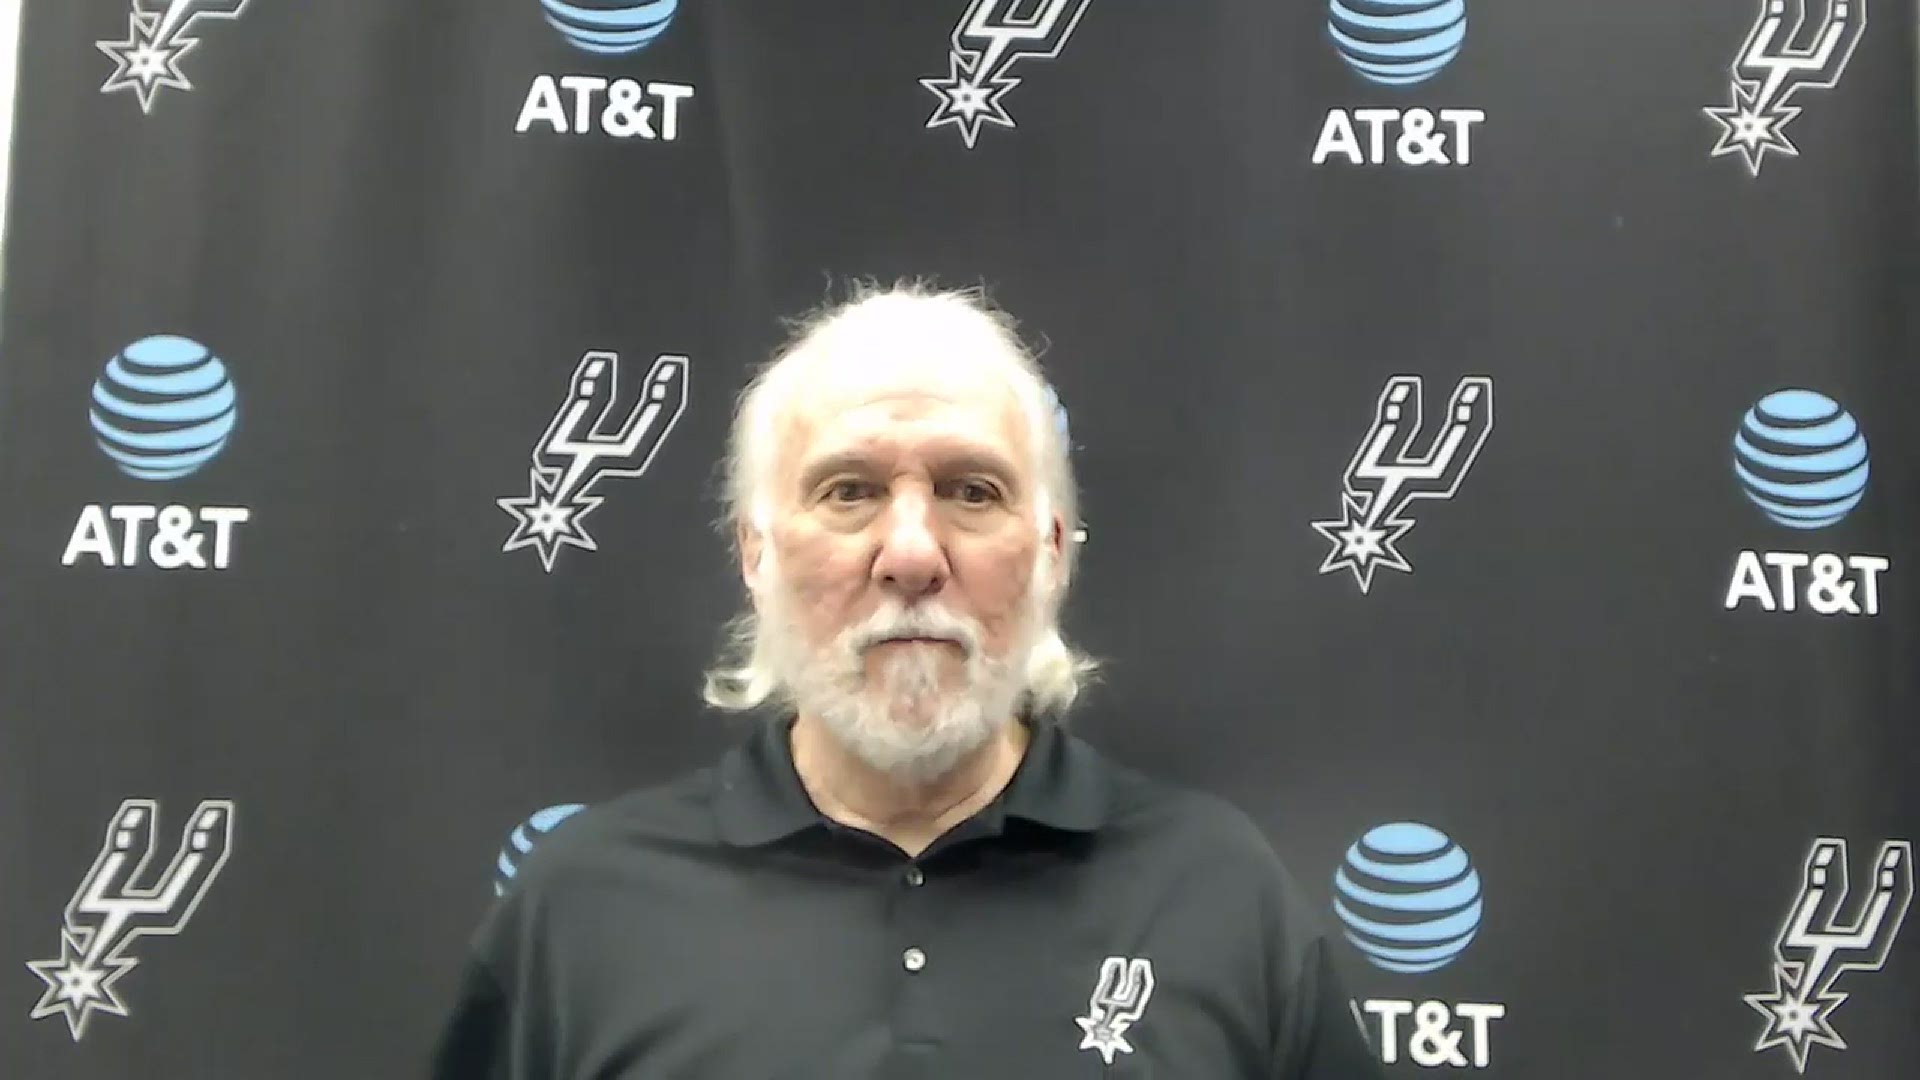 Popovich said that the team played well but made too many mistakes and lost on the boards in their first game after the All Star break.